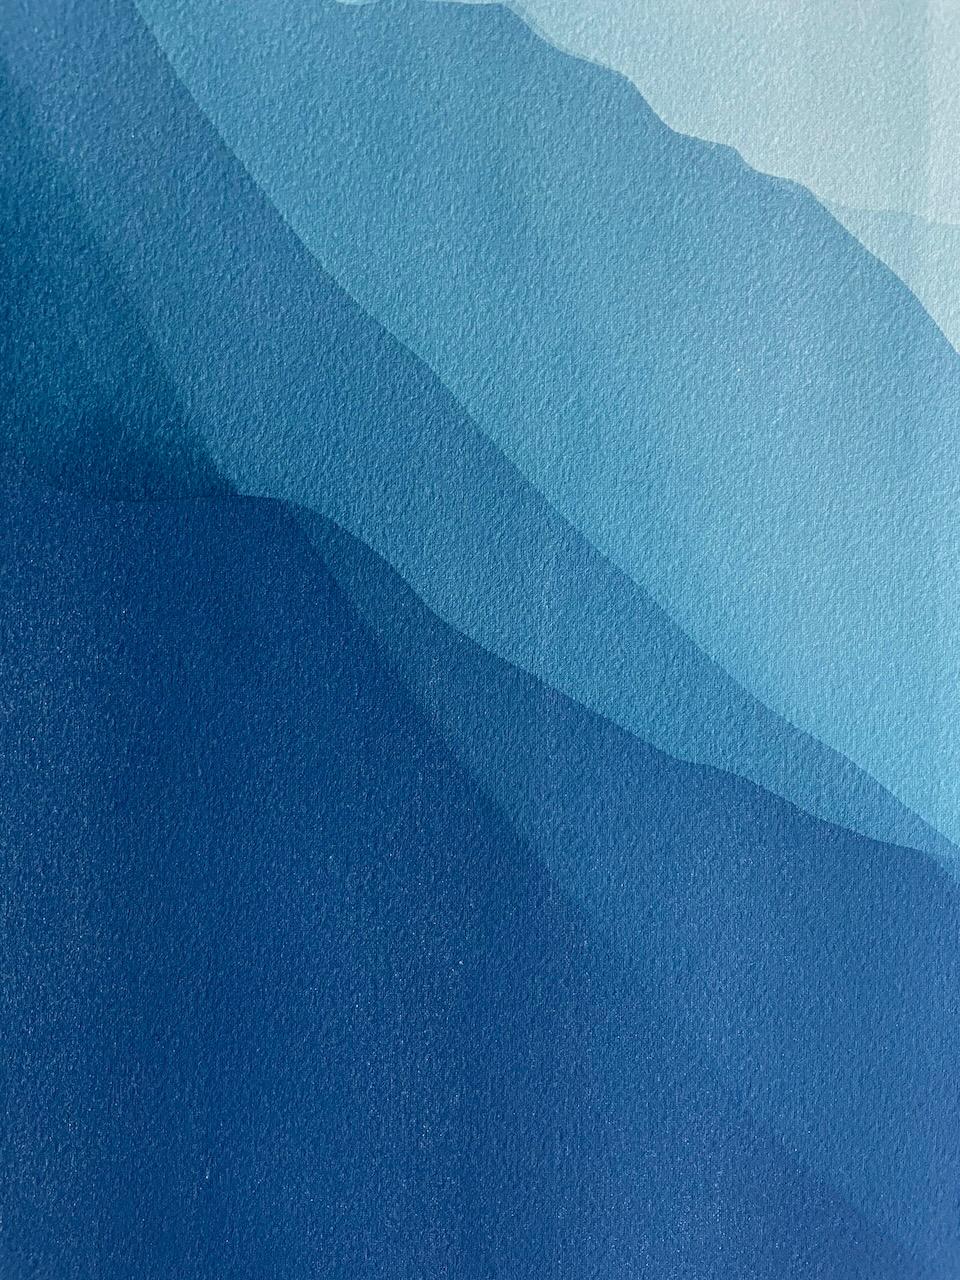 Sea Cliffs 6 (Hand-printed 40 x 20 inch abstract cyanotype) For Sale 2